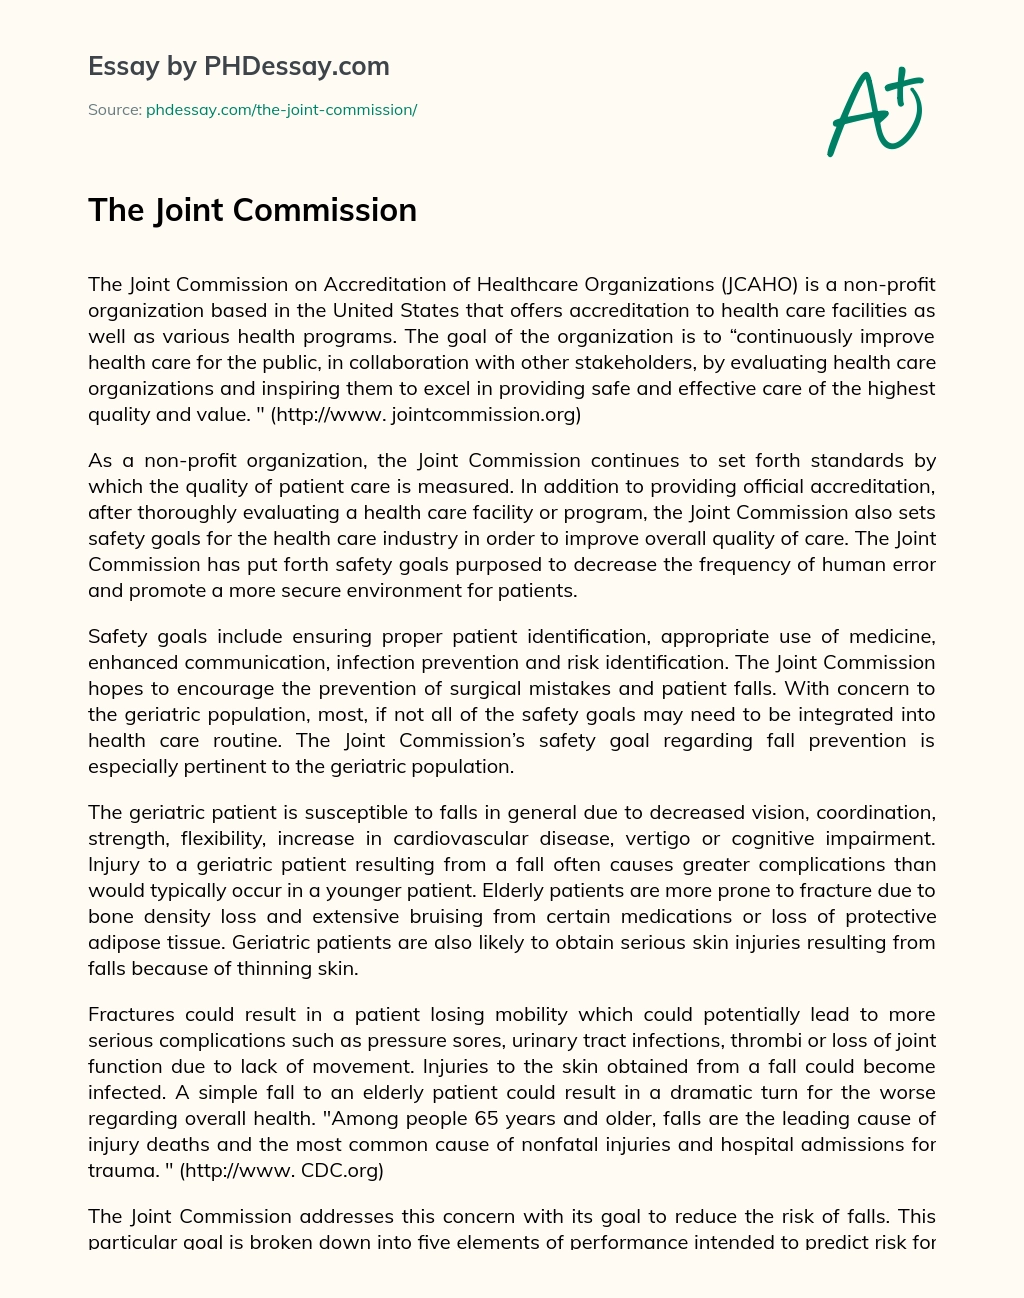 The Joint Commission essay